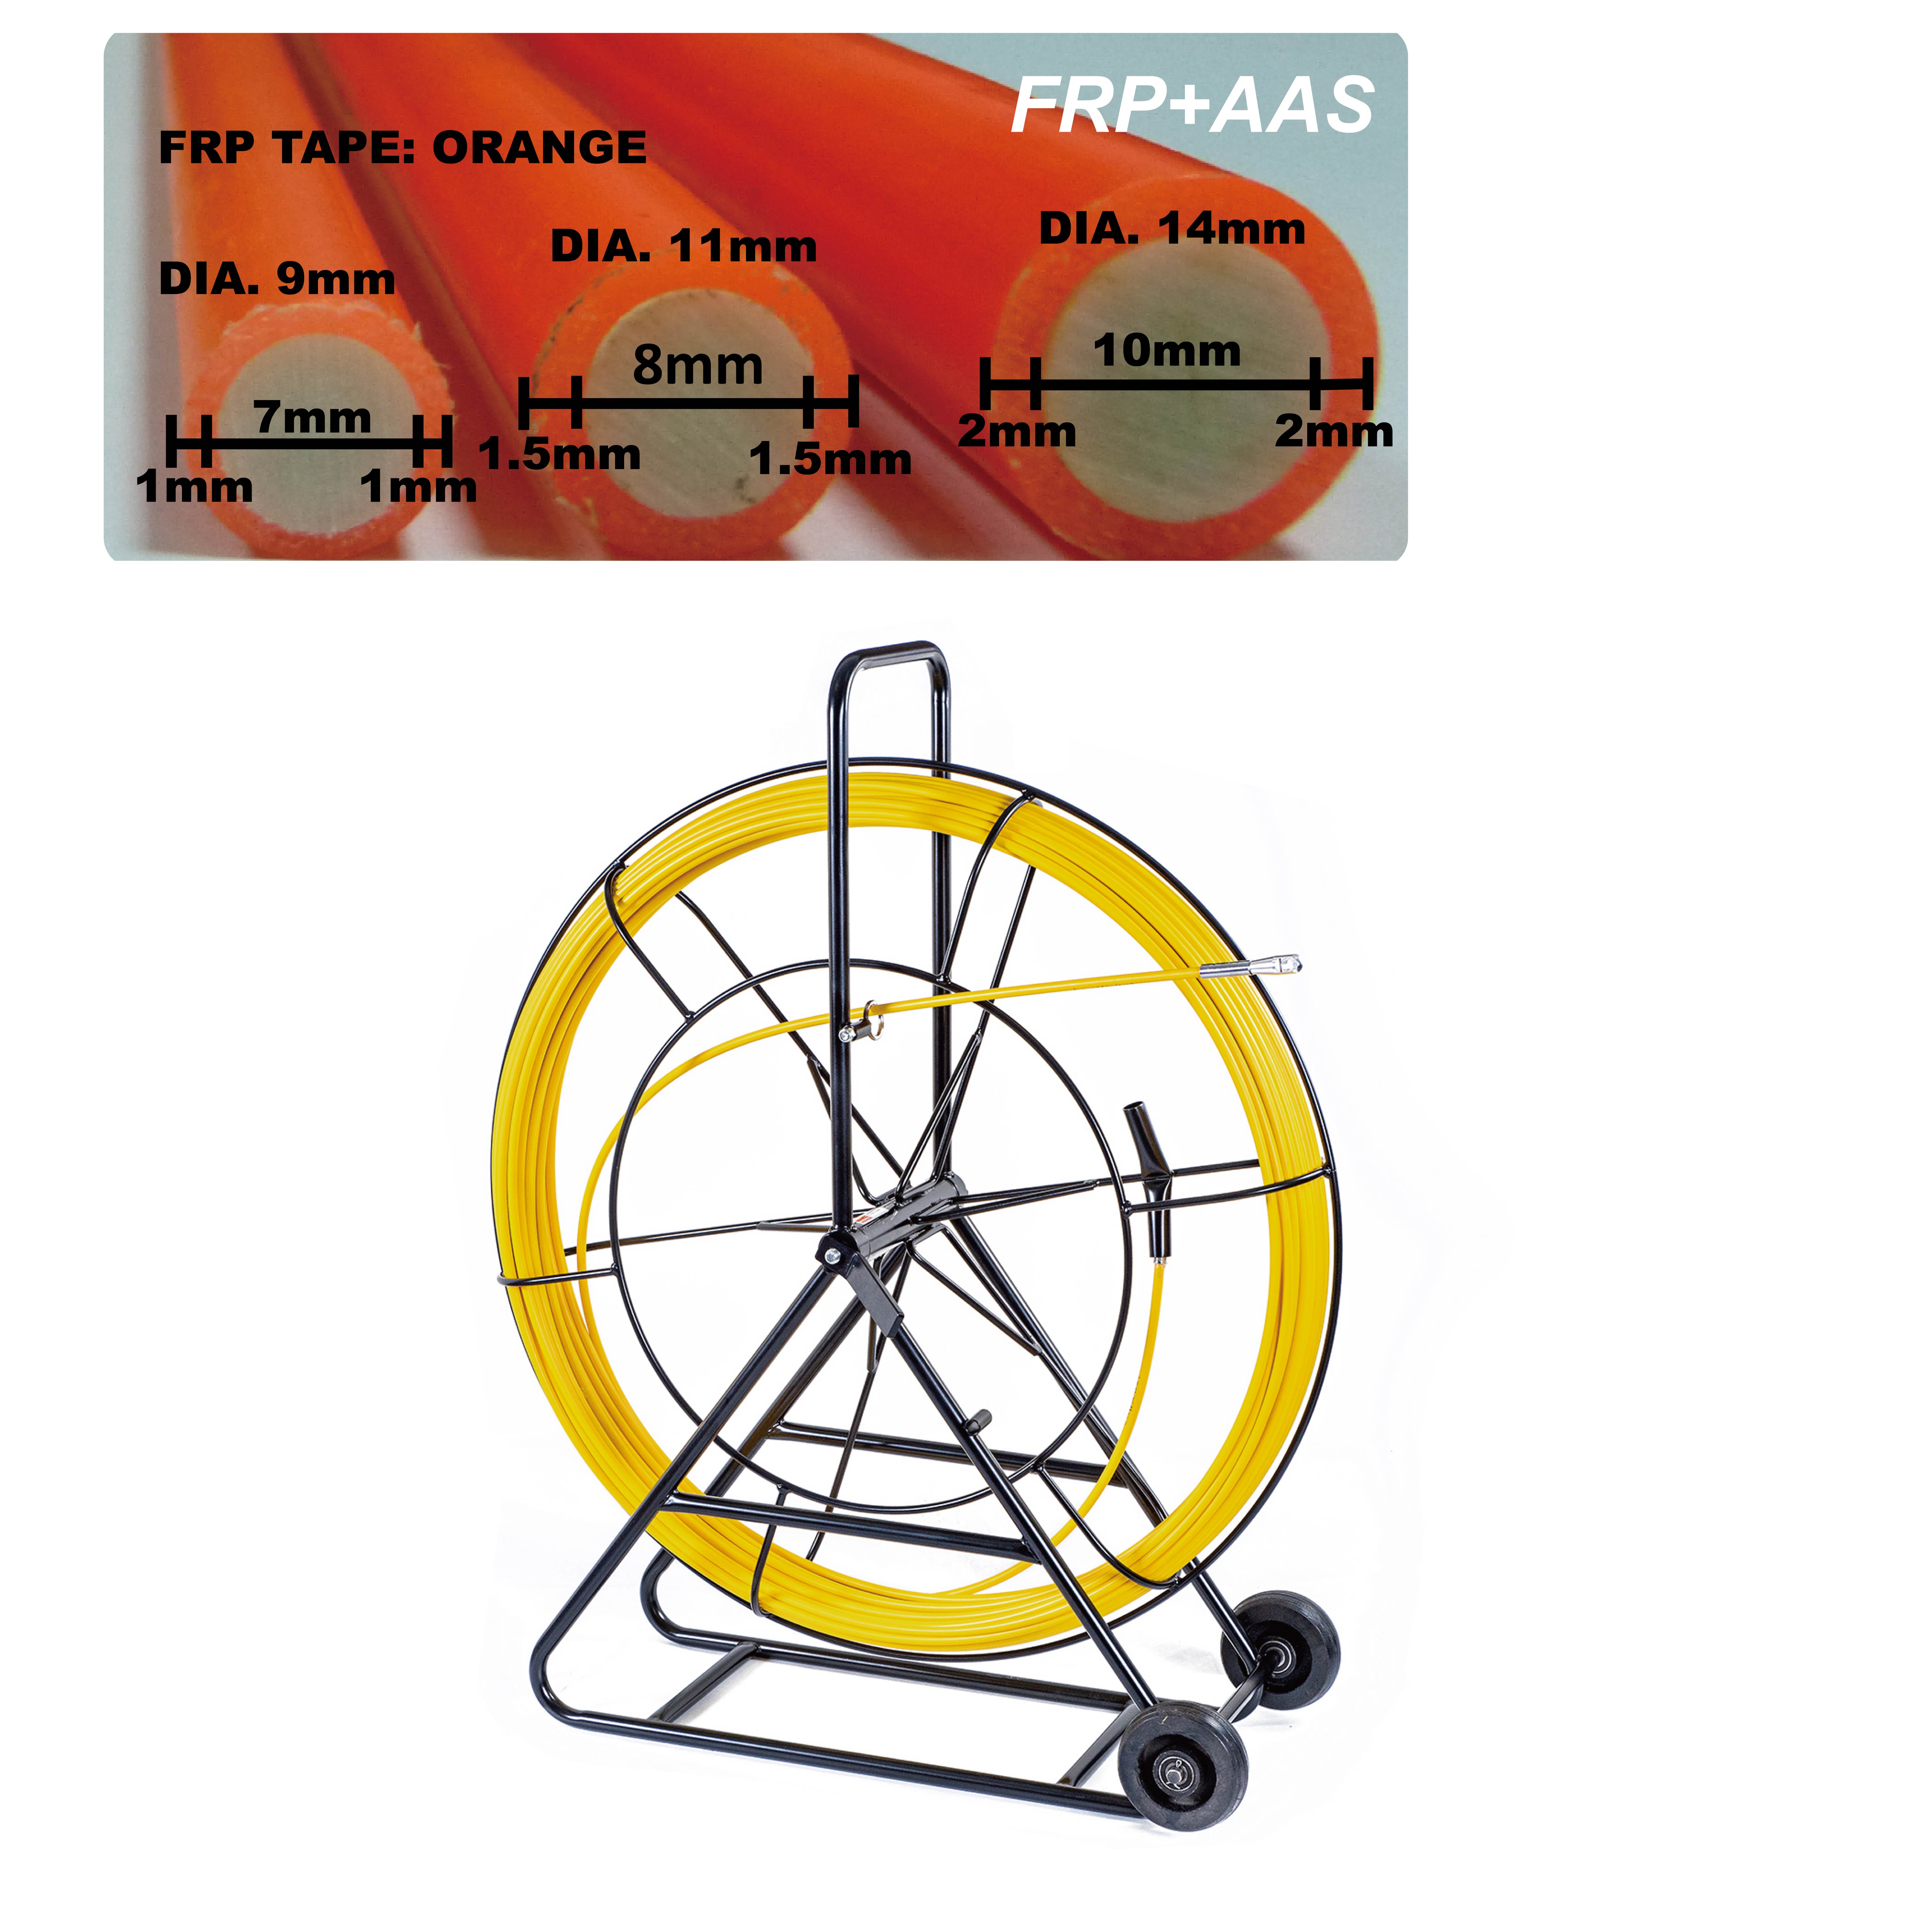 FISH TAPES/ WIRE GUIDERS WITH HEAVY DURABLE CONSTRUCTION FRAME